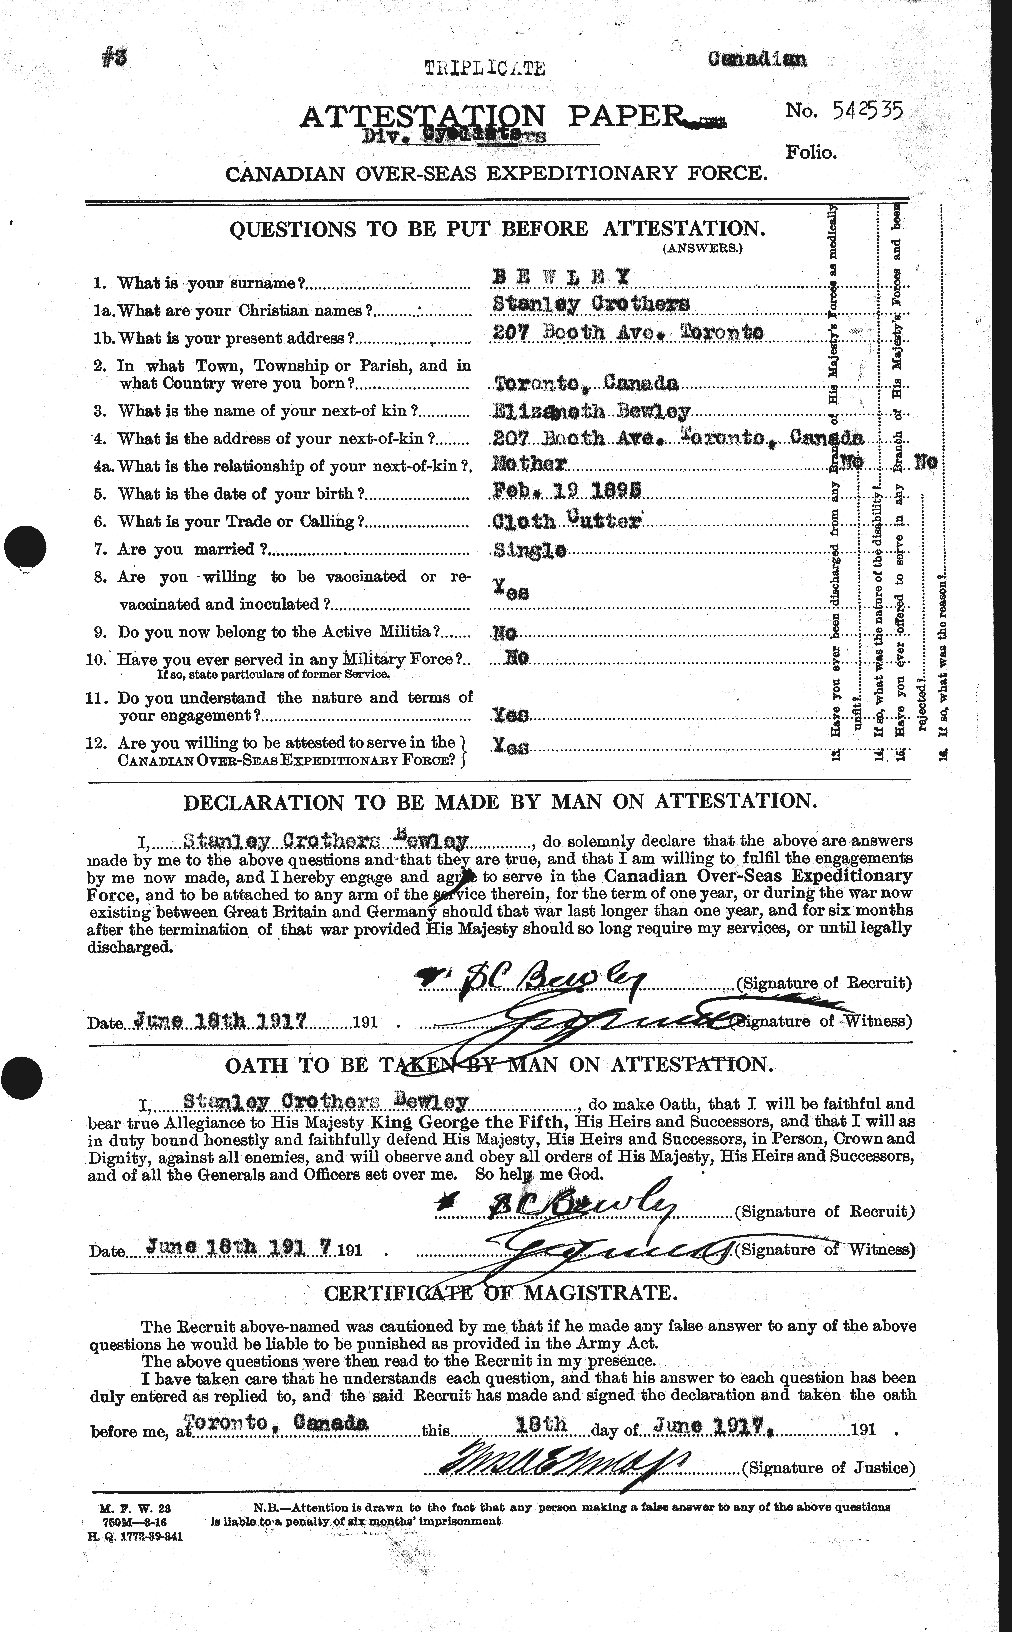 Personnel Records of the First World War - CEF 237467a